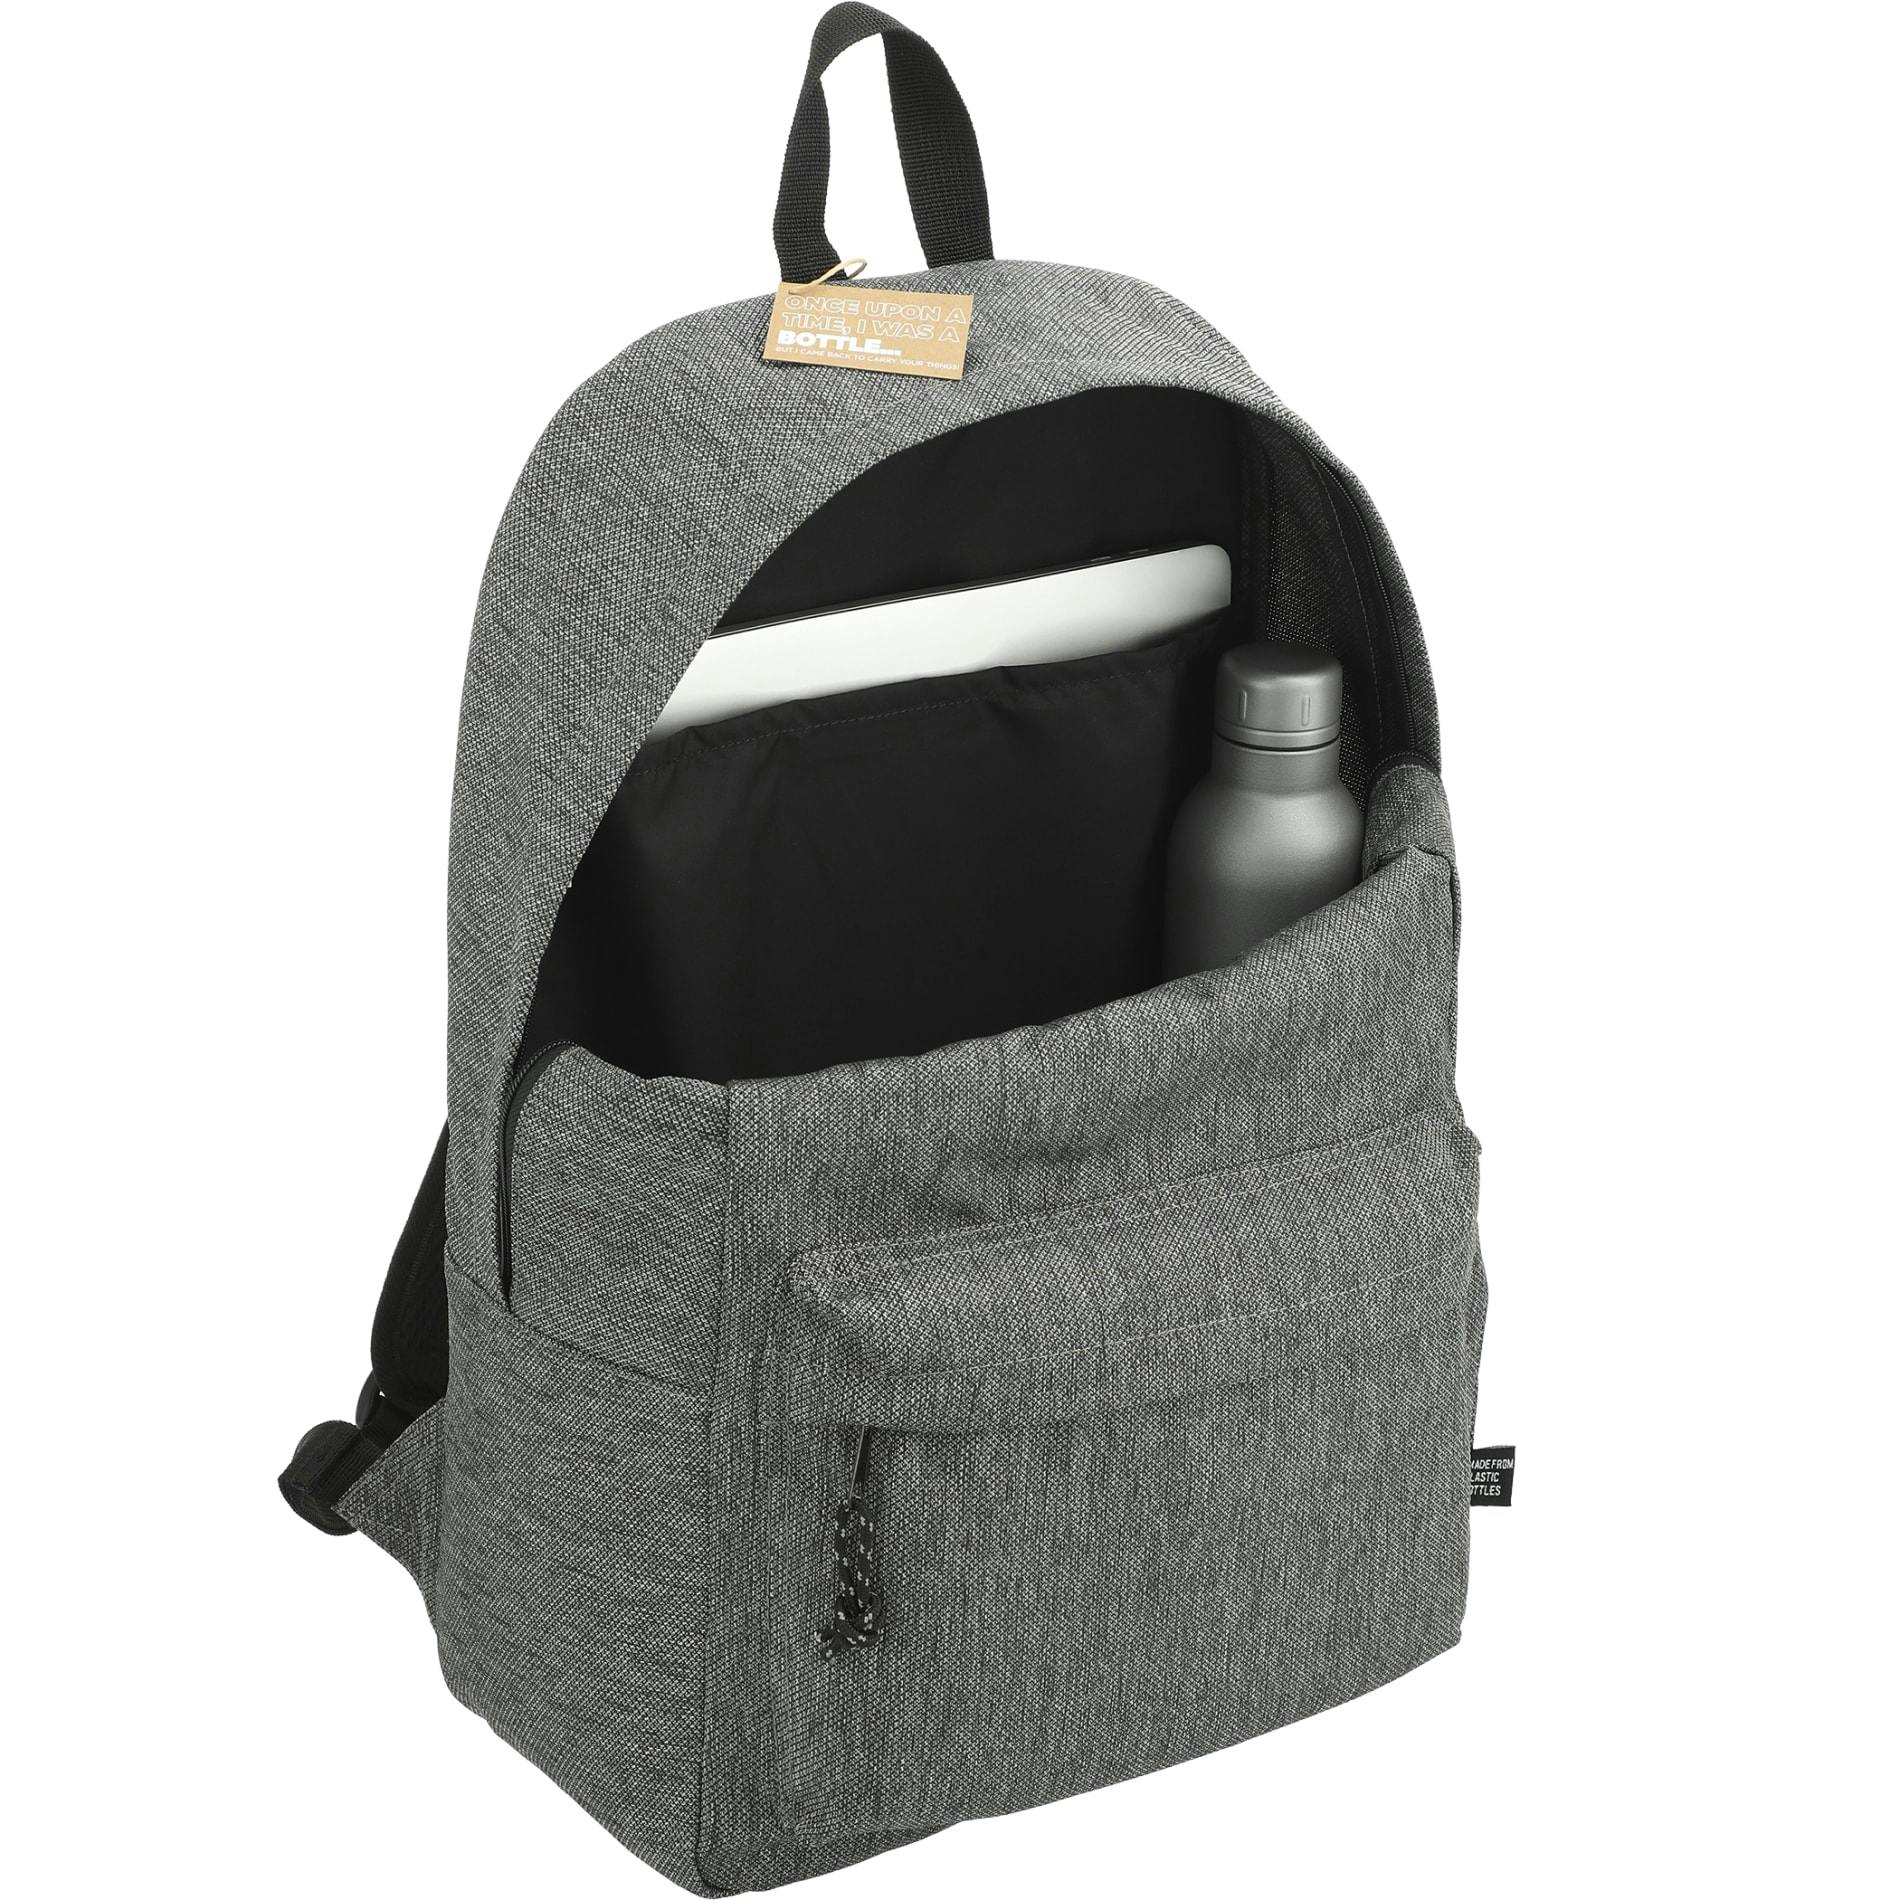 Vila Recycled 15" Computer Backpack - additional Image 4